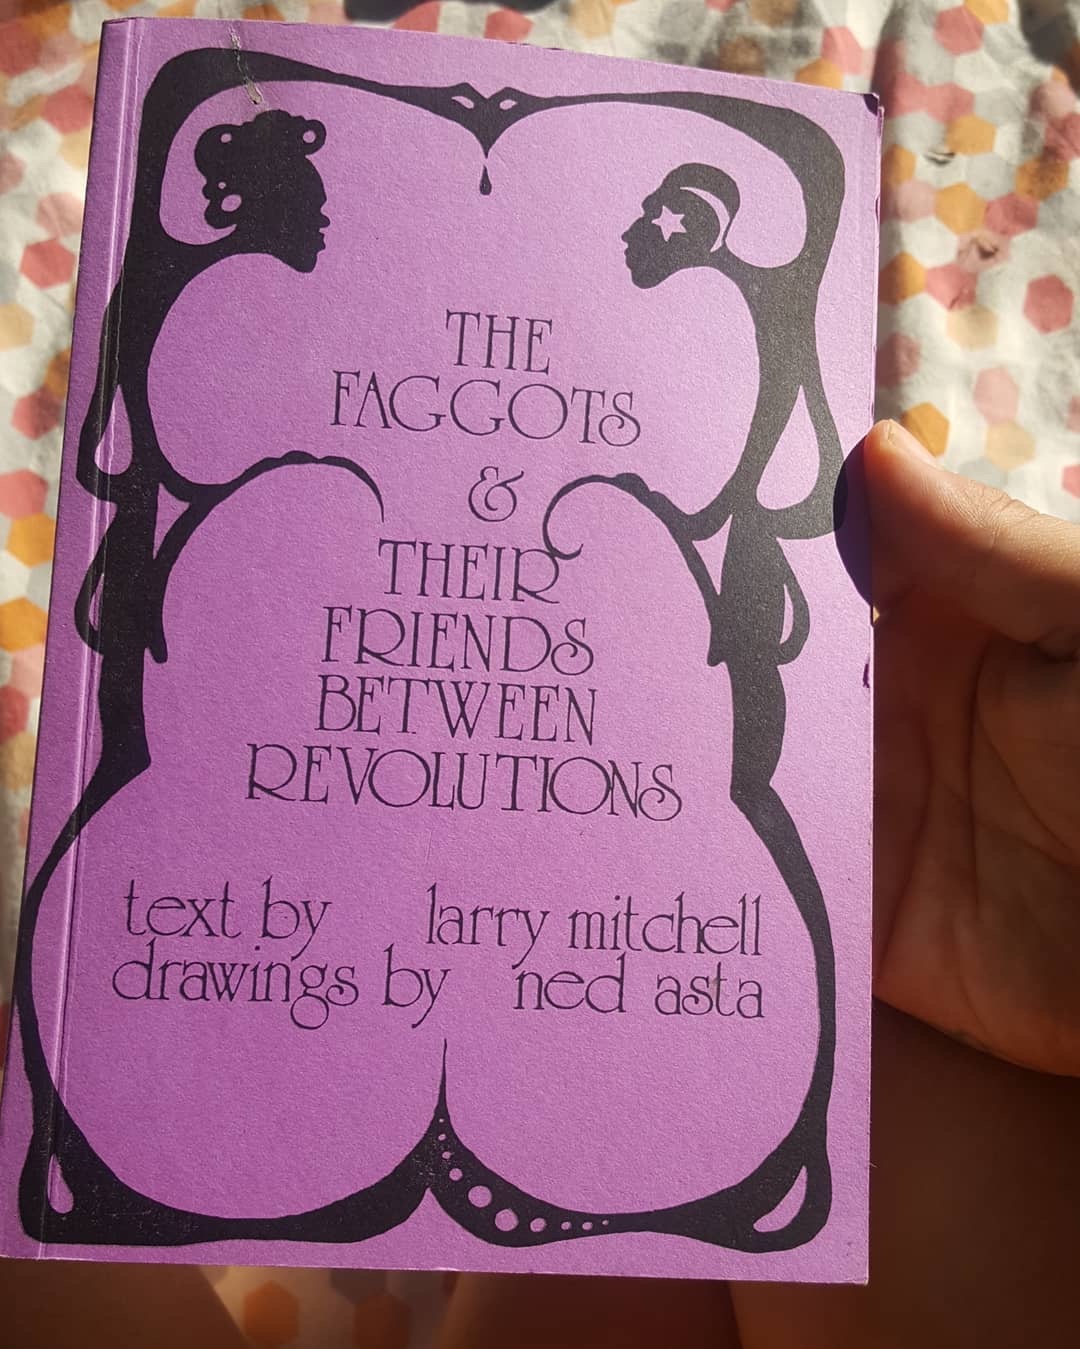 Monk Reviews The Faggots and Their Friends Between Revolutions by Larry Mitchell